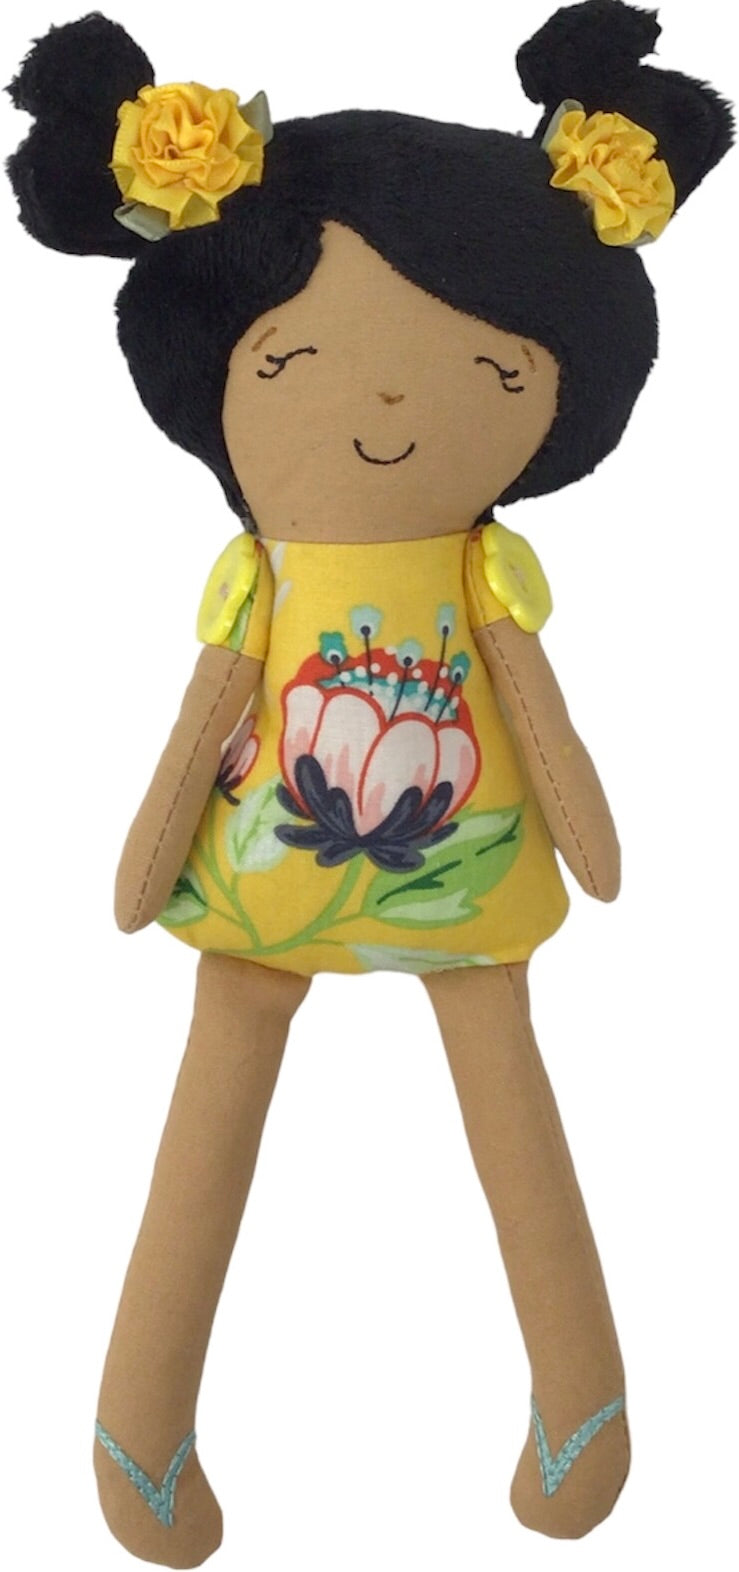 Flower Button Doll - Give your little one a new one-of-a-kind accomplice inspired by folk art and historical role models!